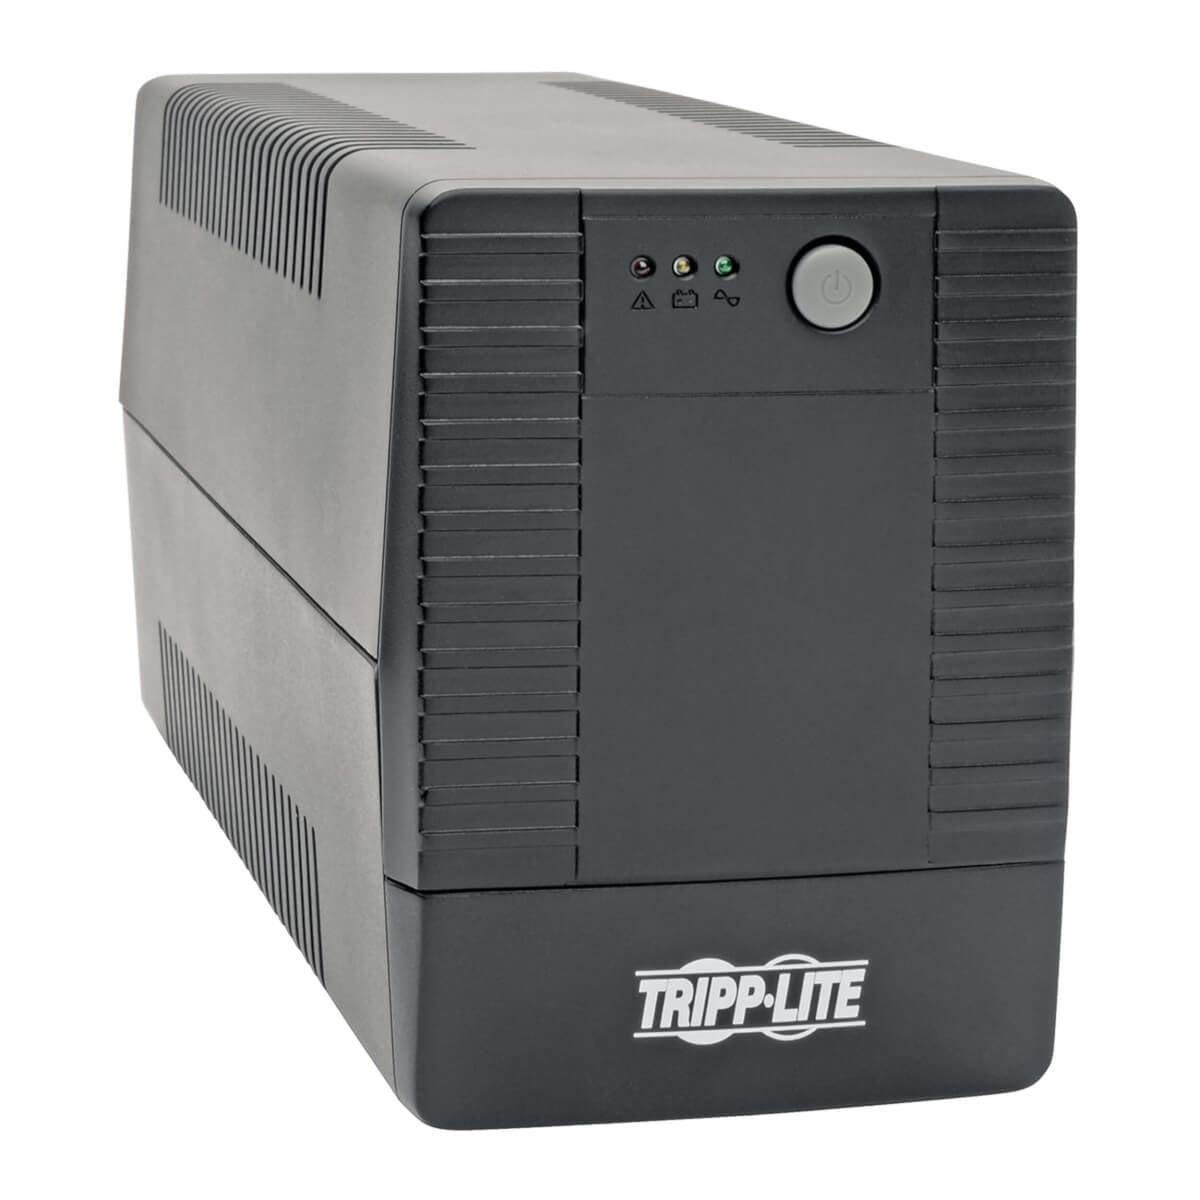 Tripp Lite 650Va 480W Line-Interactive Ups With 6 Outlets - Avr, 120V, 50/60 Hz, Usb, Tower